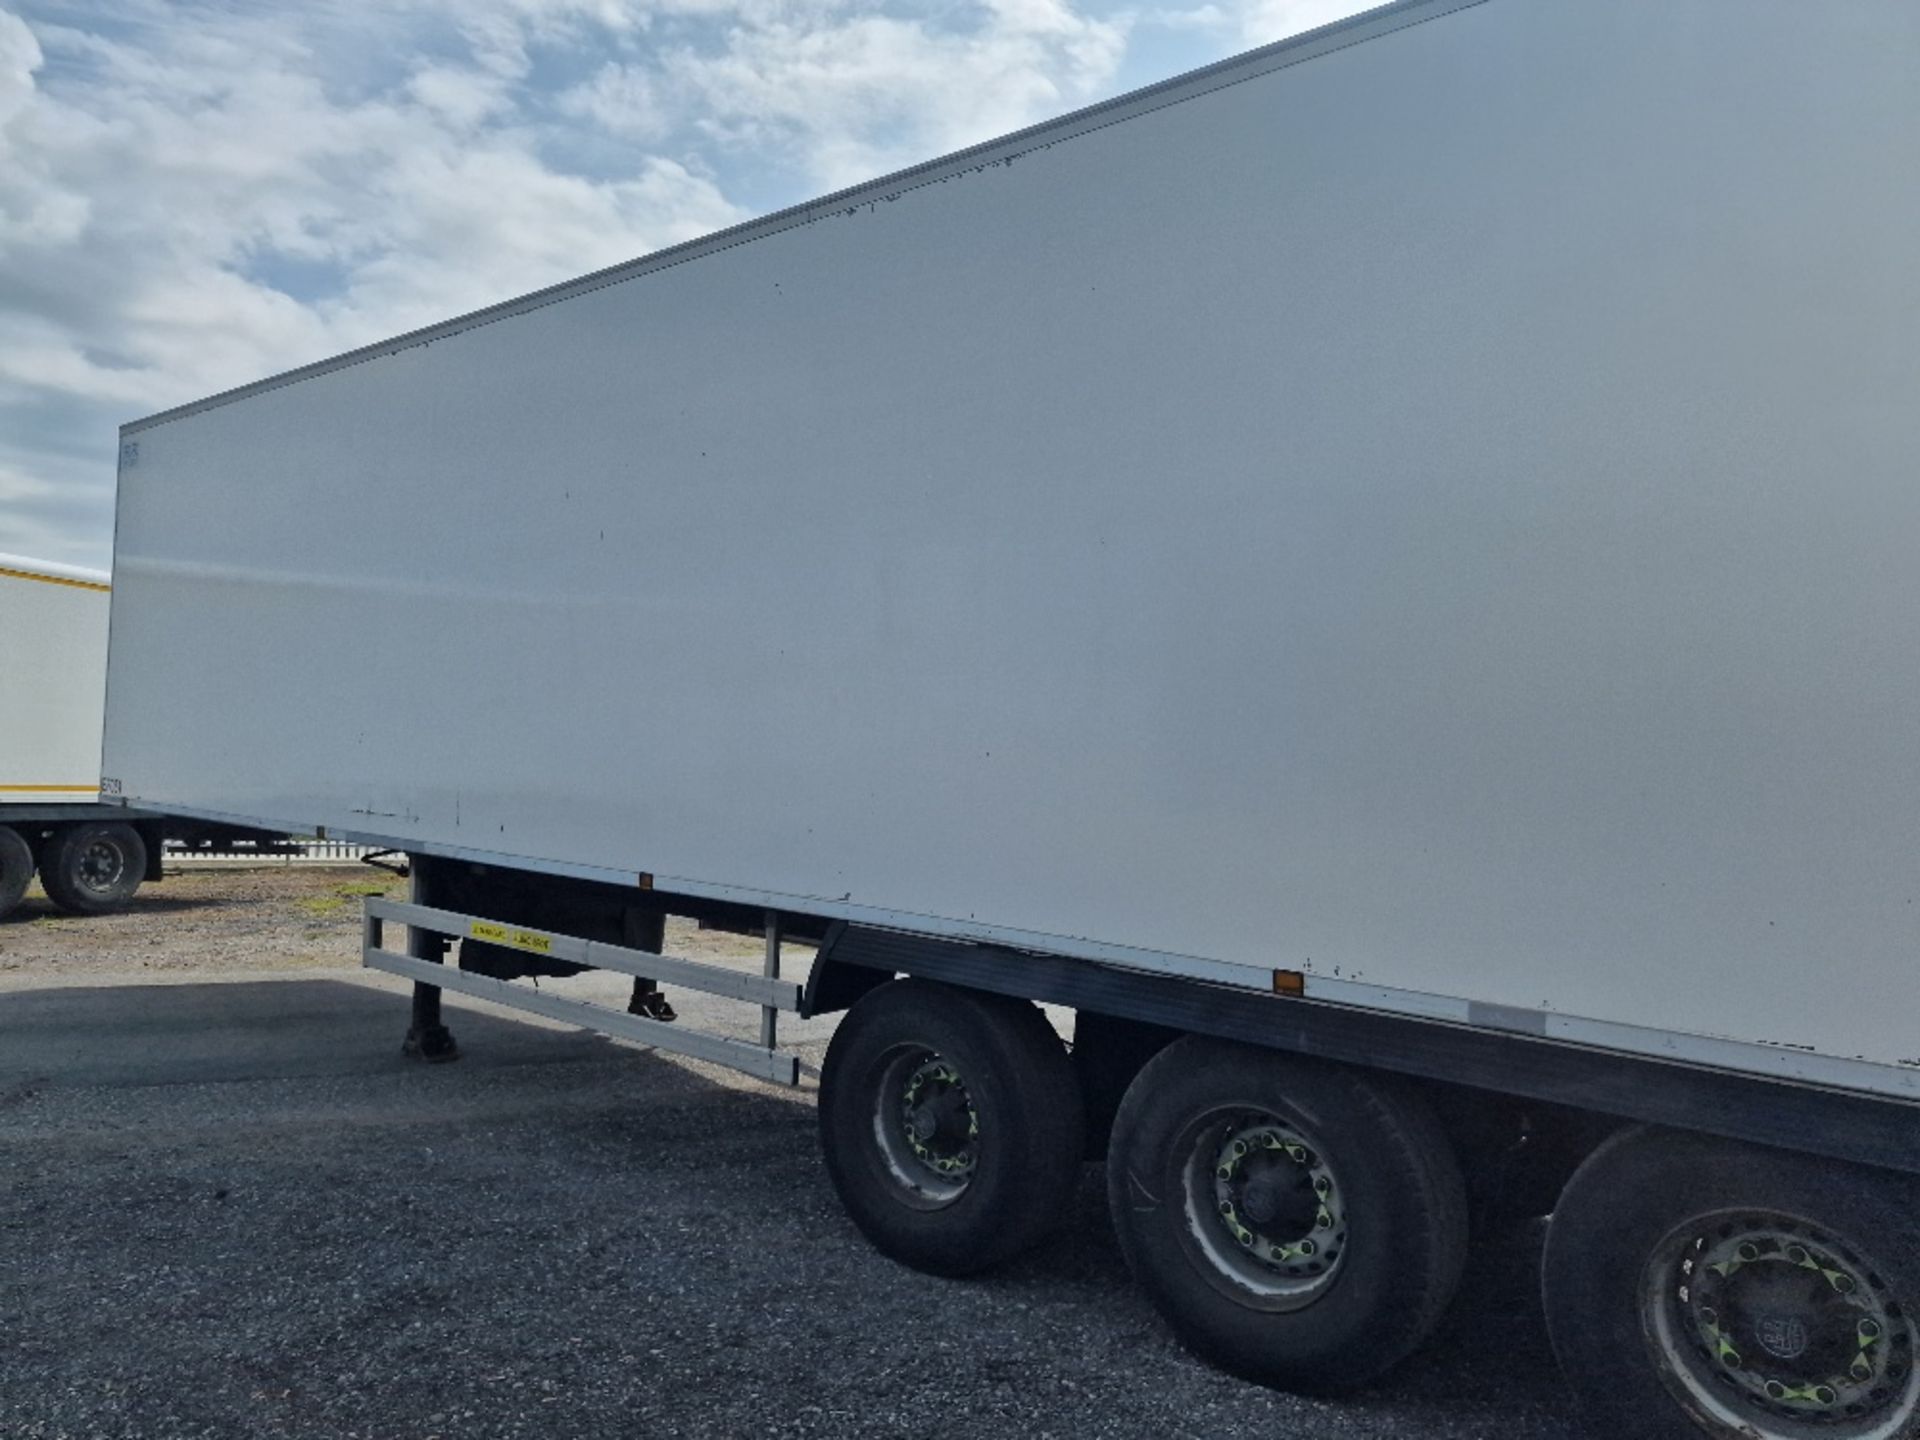 EF051 – 2015 Chereau 13.6m Refrigerated Trailer - Image 3 of 13